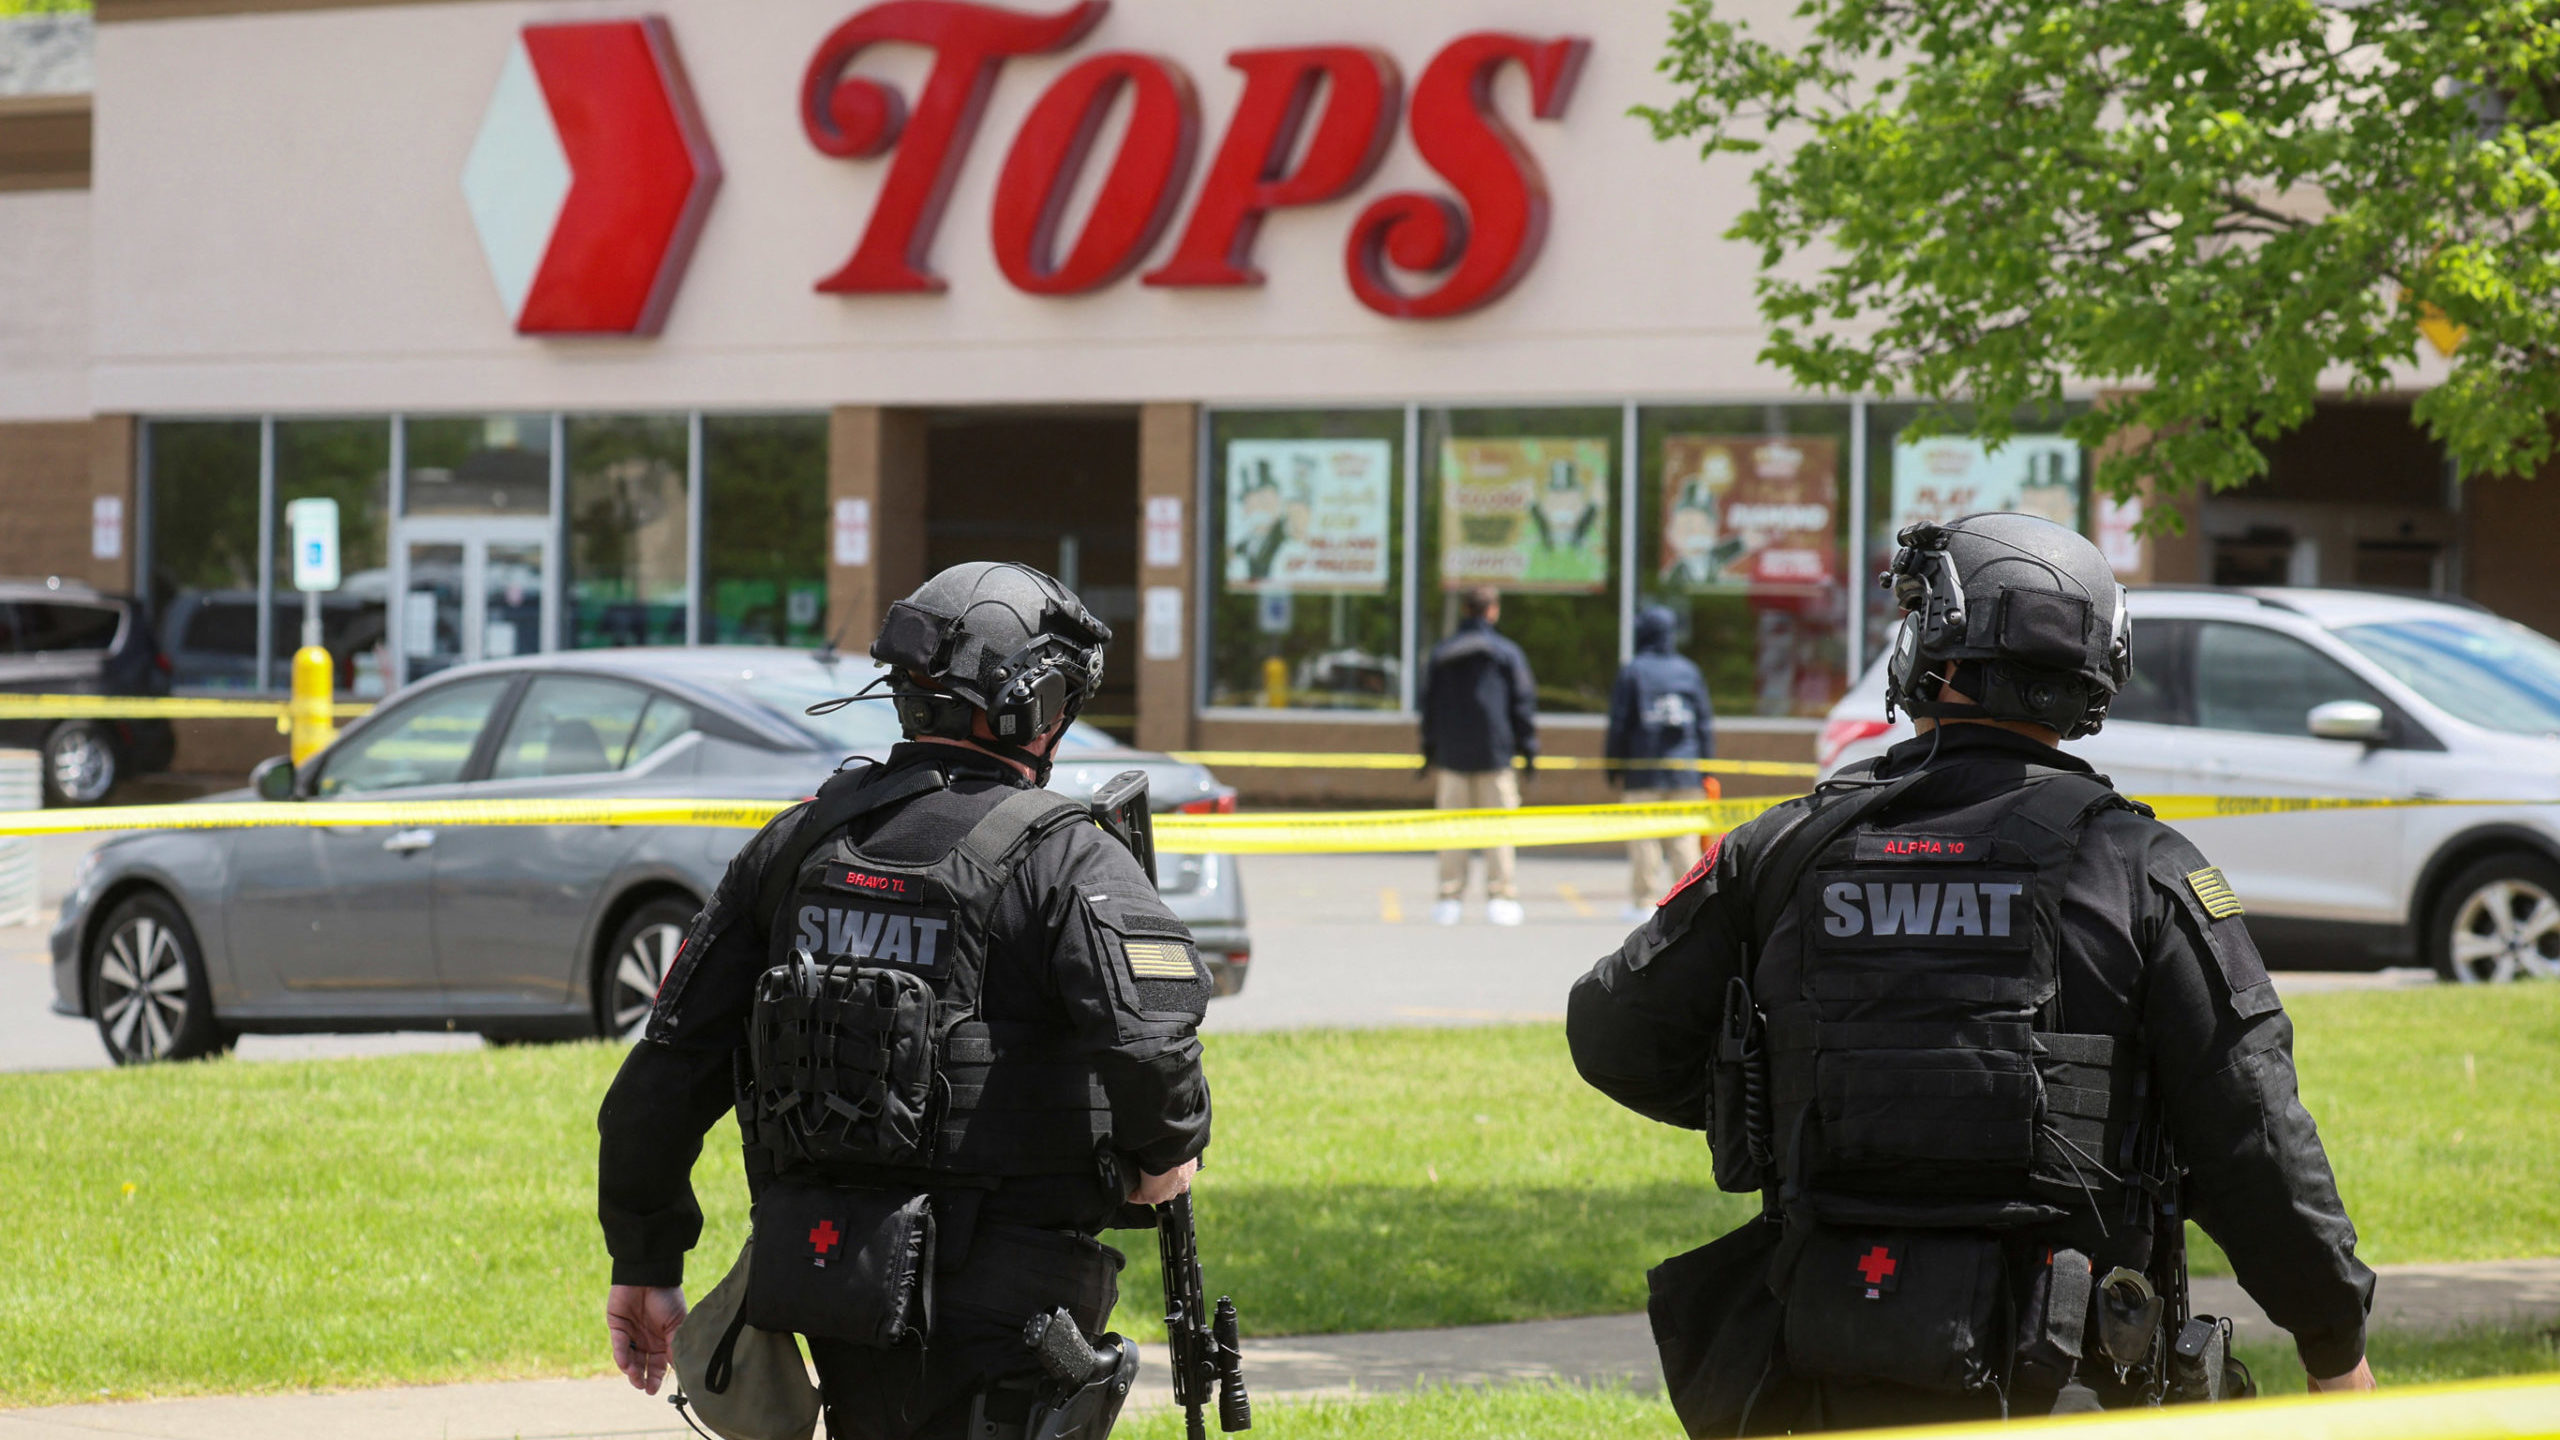 Members of the Buffalo Police department work at the scene of a shooting at a Tops supermarket in B...